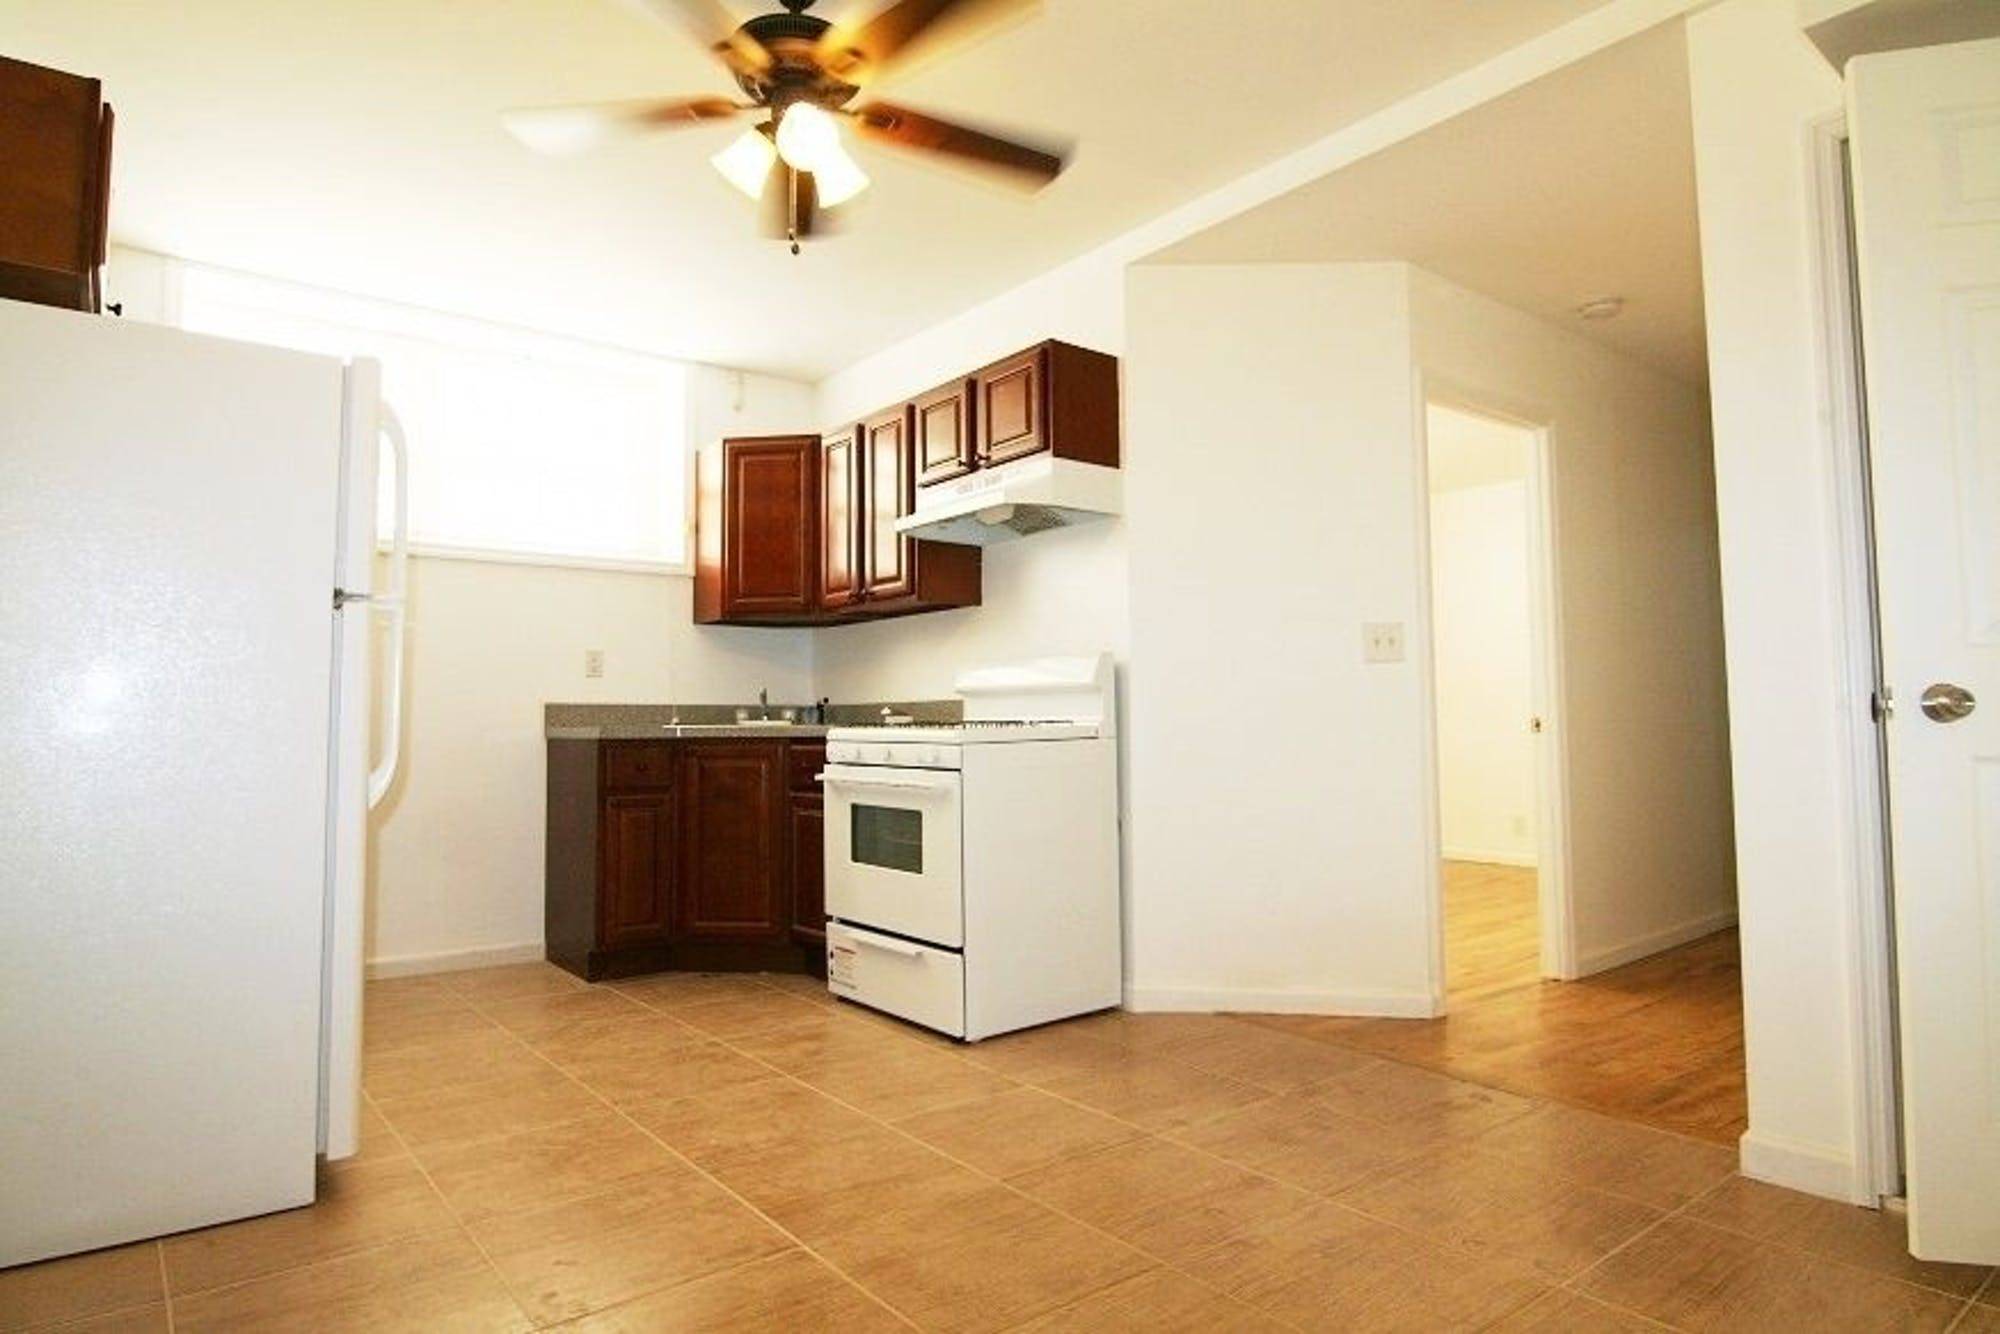 For videos of all our units go to instagram Brokering Brooklyn This ground floor unit features 2 california king size bedrooms, spacious kitchen and bathroom, hardwood floors throughout and much ...